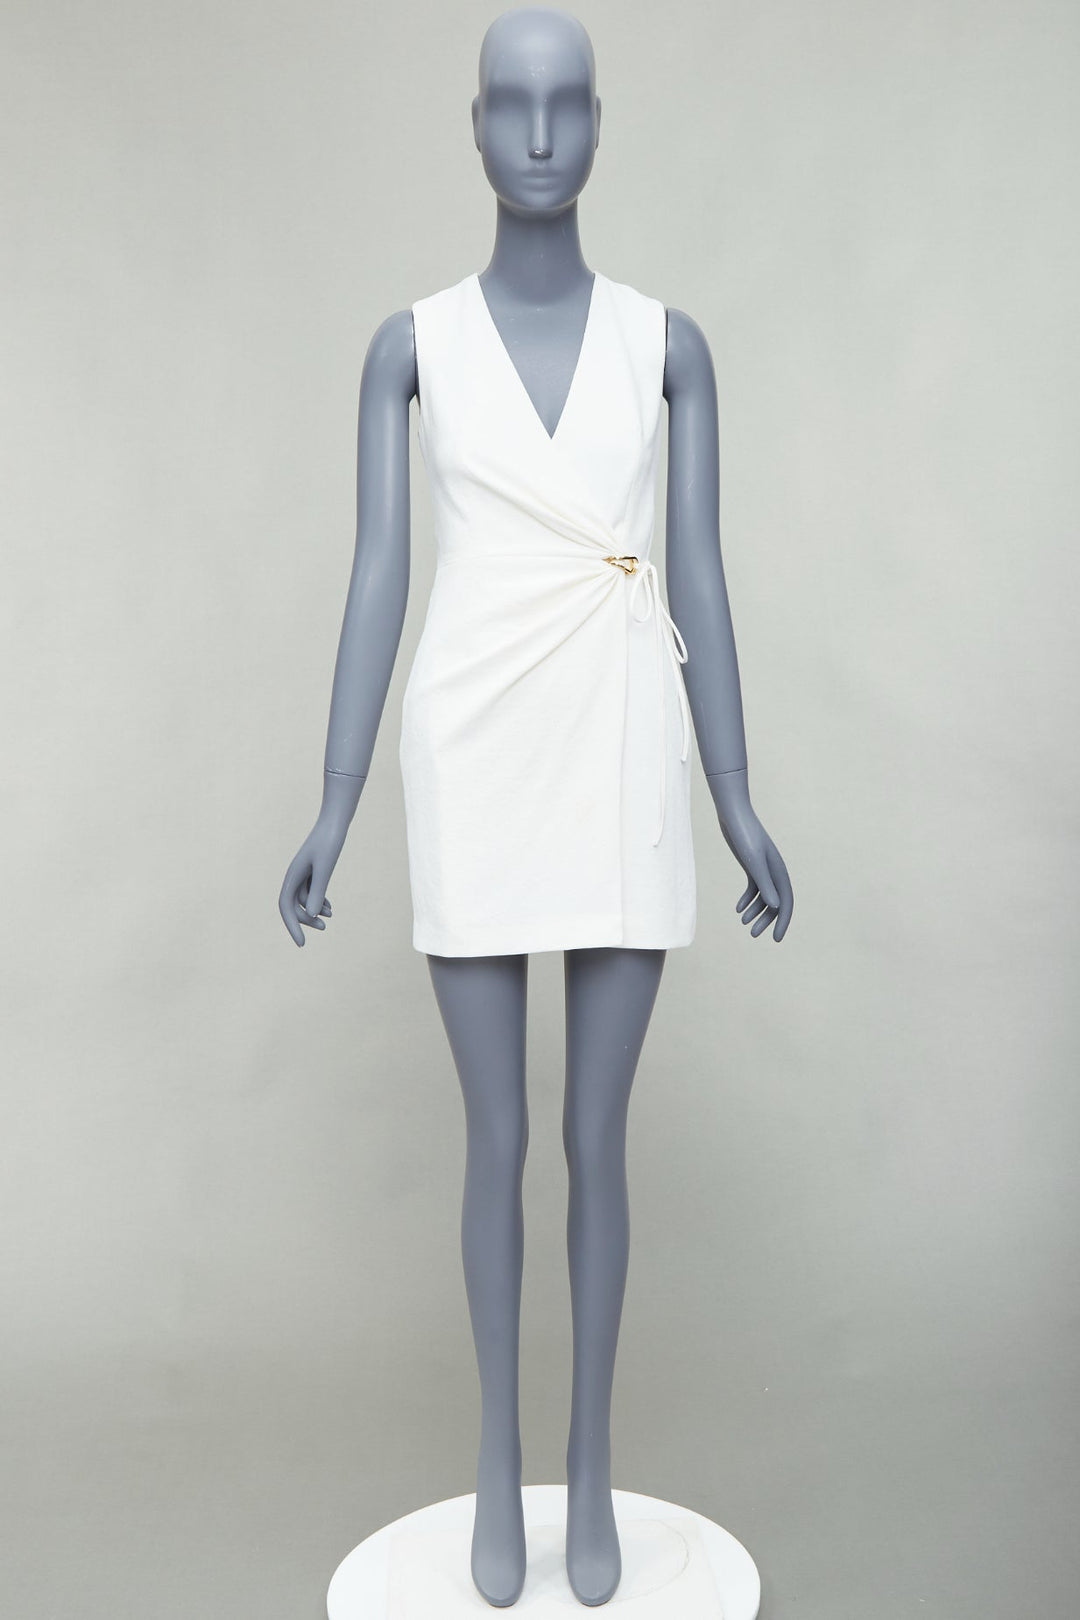 DION LEE white textured gold hardware ruched wrap dress UK6 XS